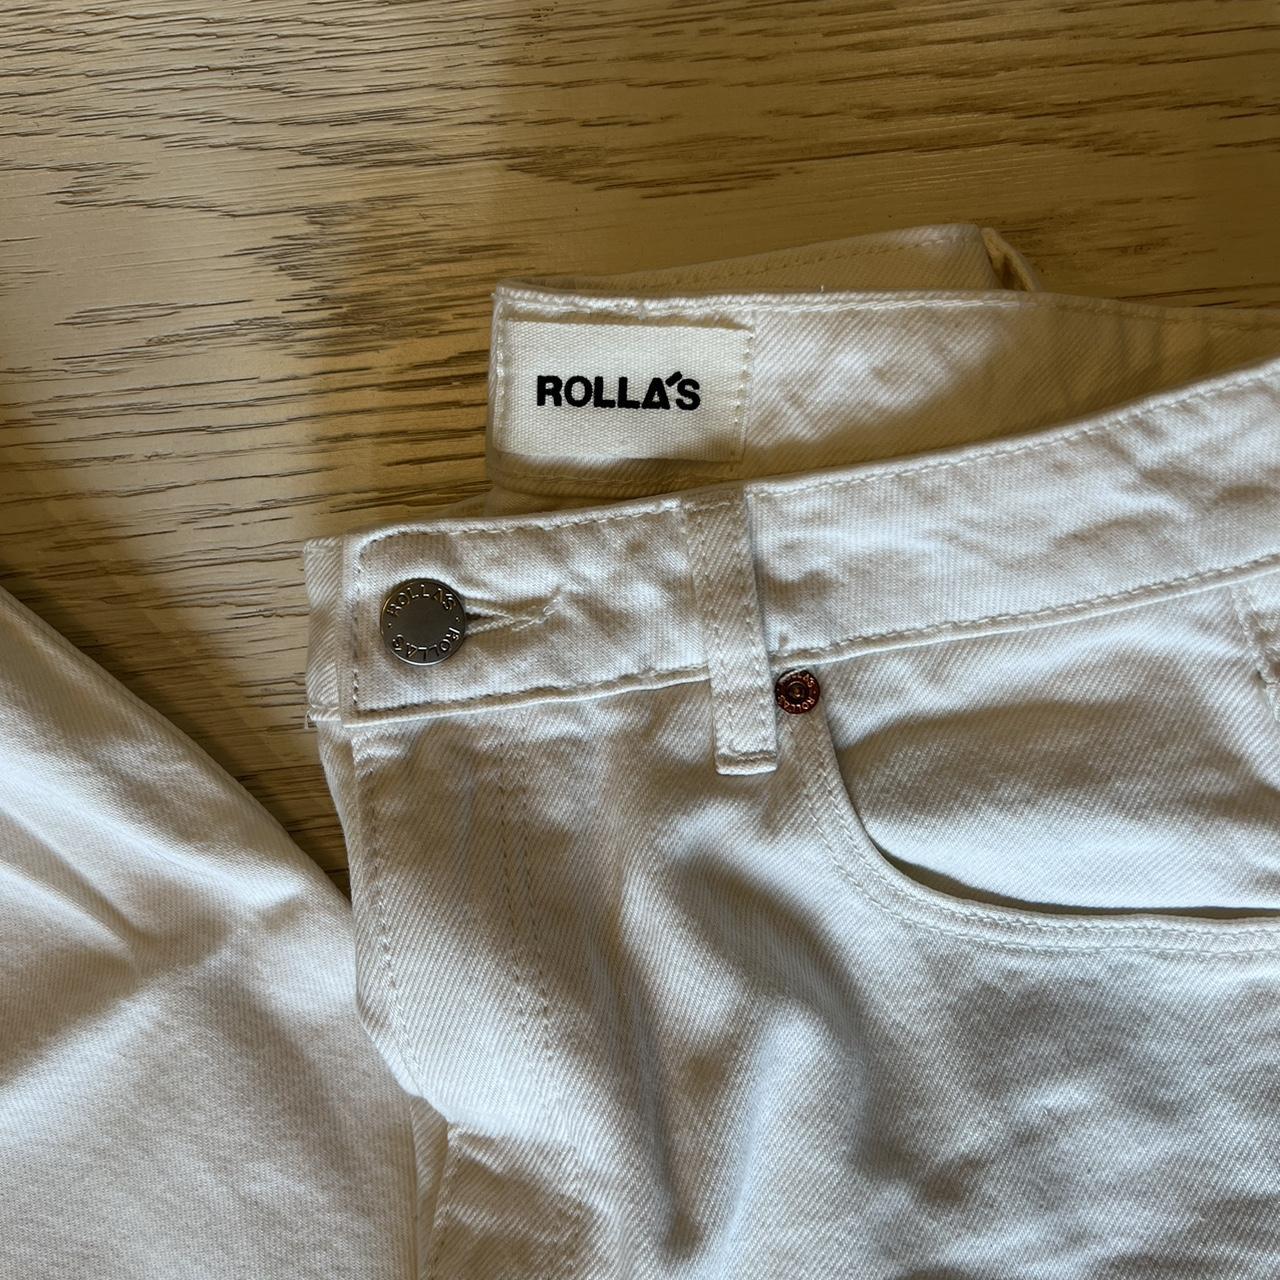 ROLLA’S White Jeans - Worn Once! - Depop